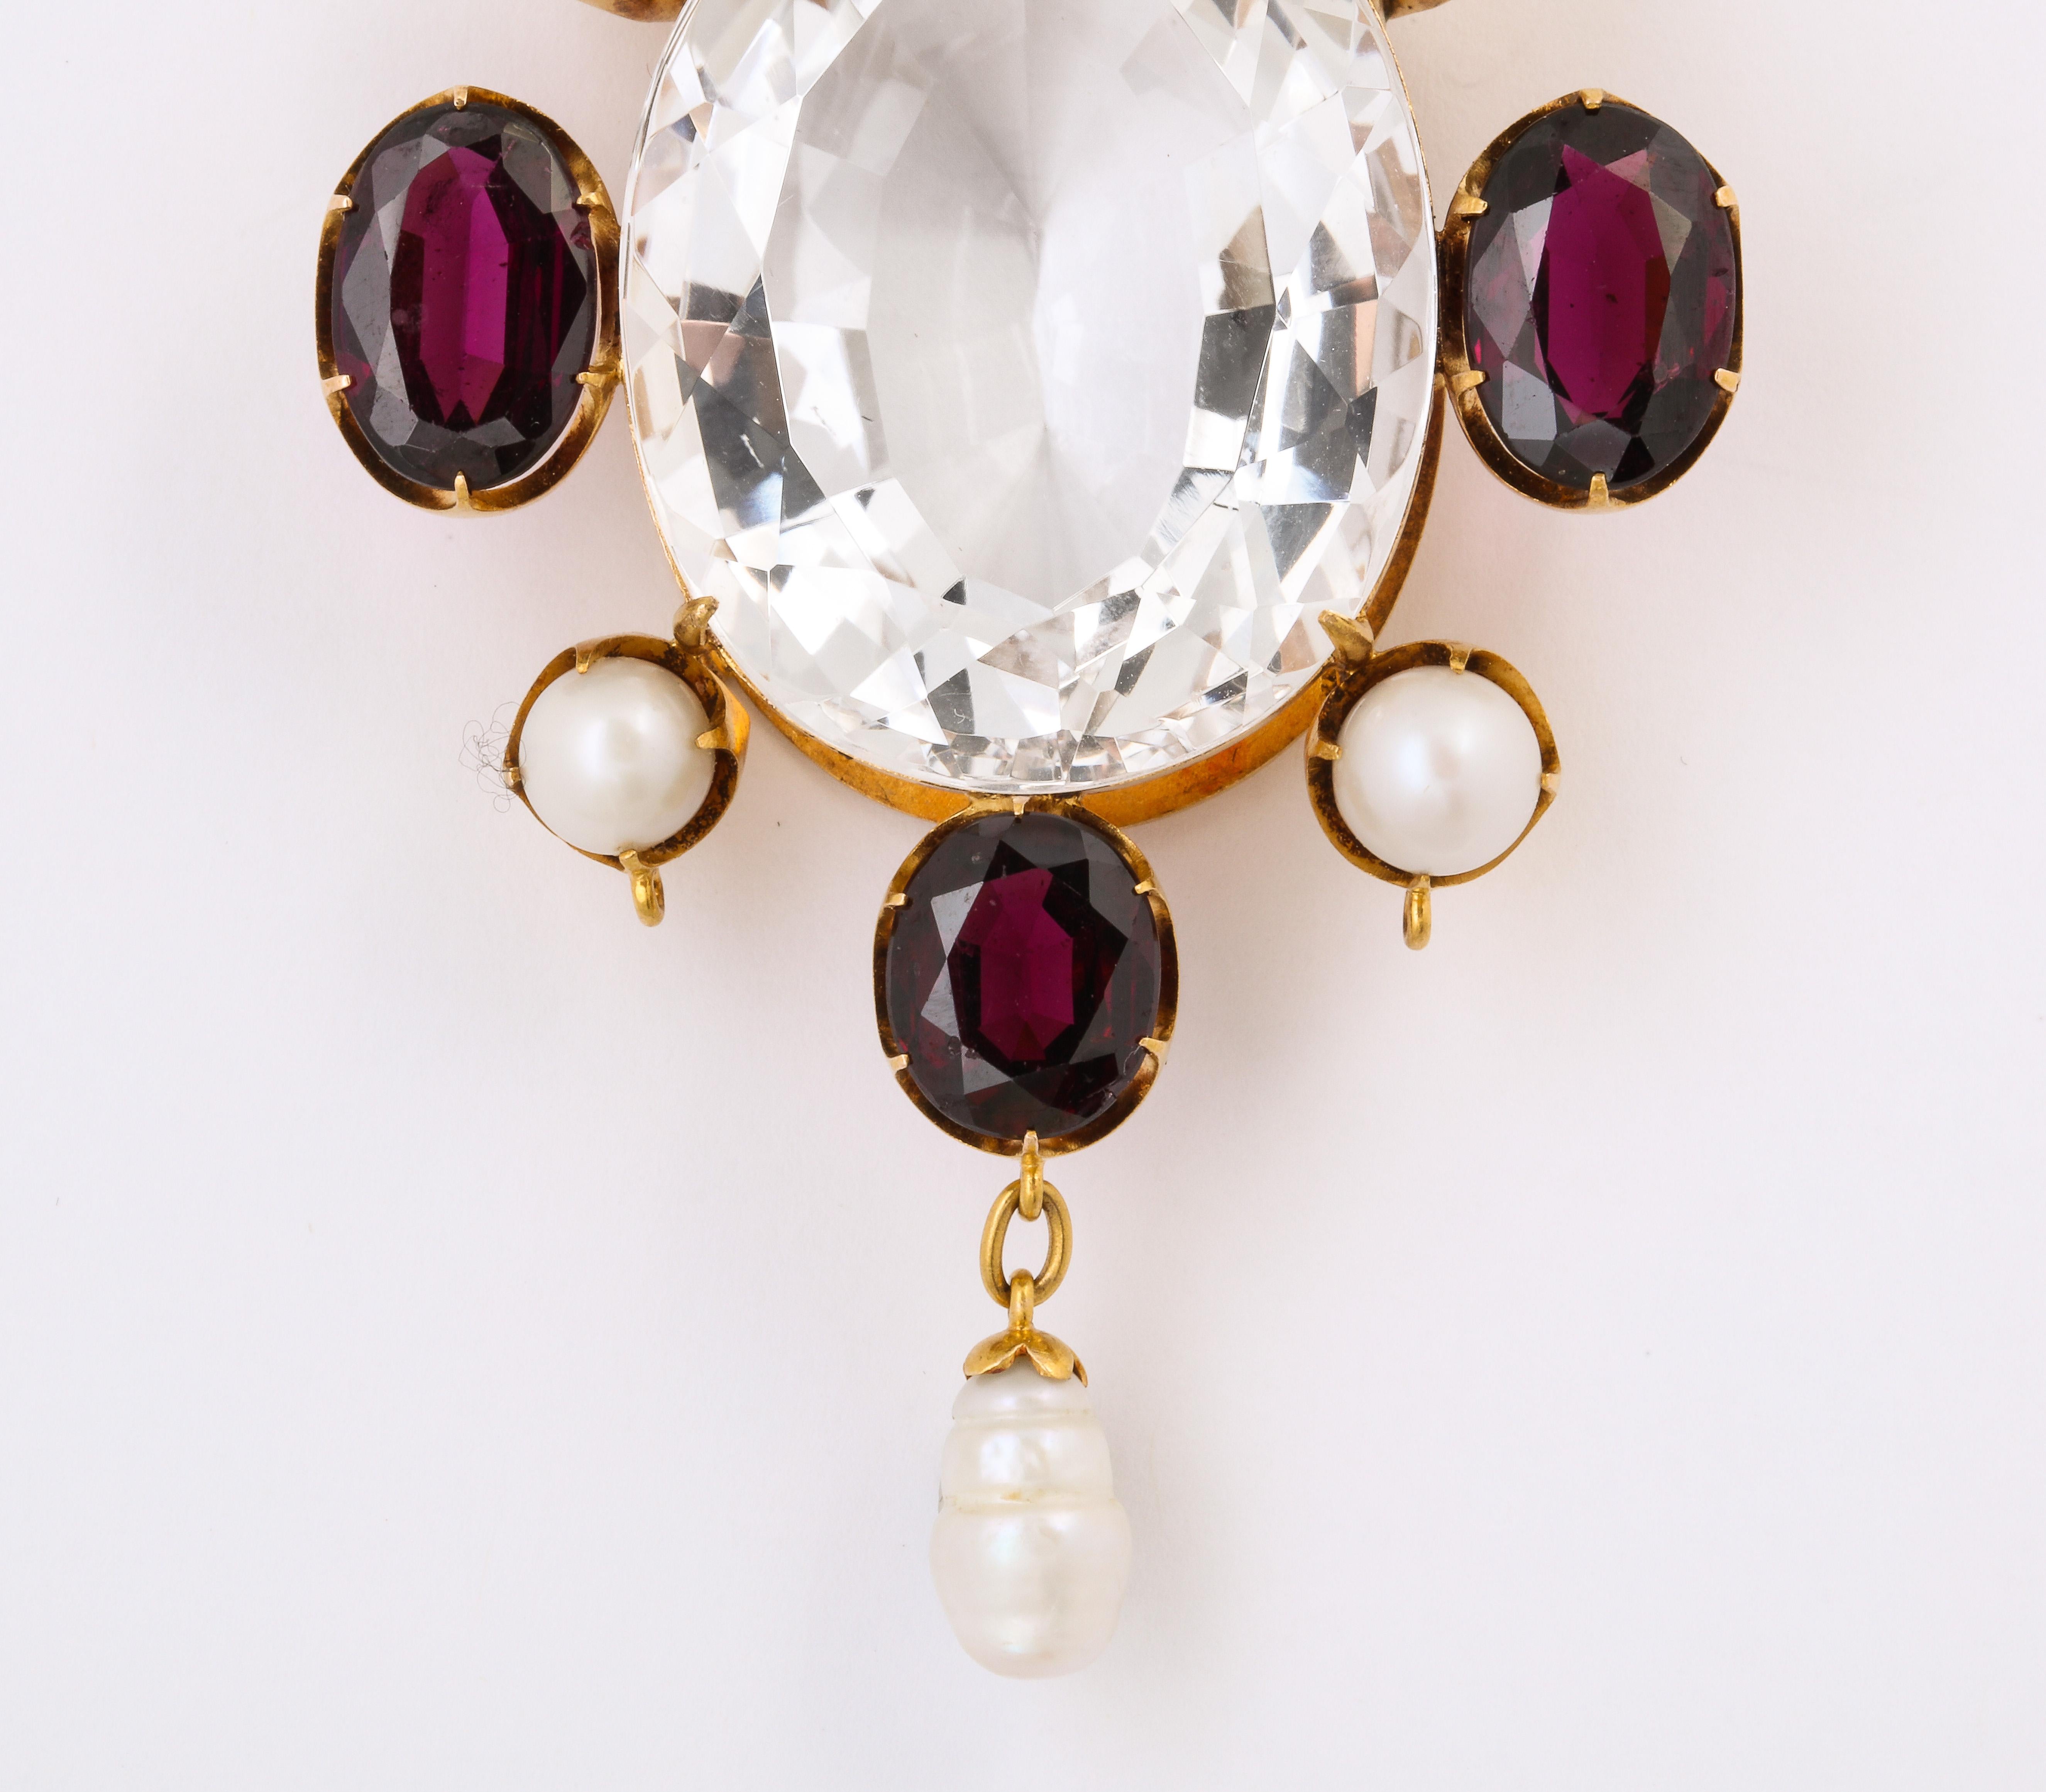 Some like it hot and dramatic which is an accurate description of this large 60ct Victorian Rock Crystal, Garnet and Natural Pearl Pendant. If that is not enough magic, add an original bale, six natural pearls and 11n cts of wine colored garnets. A